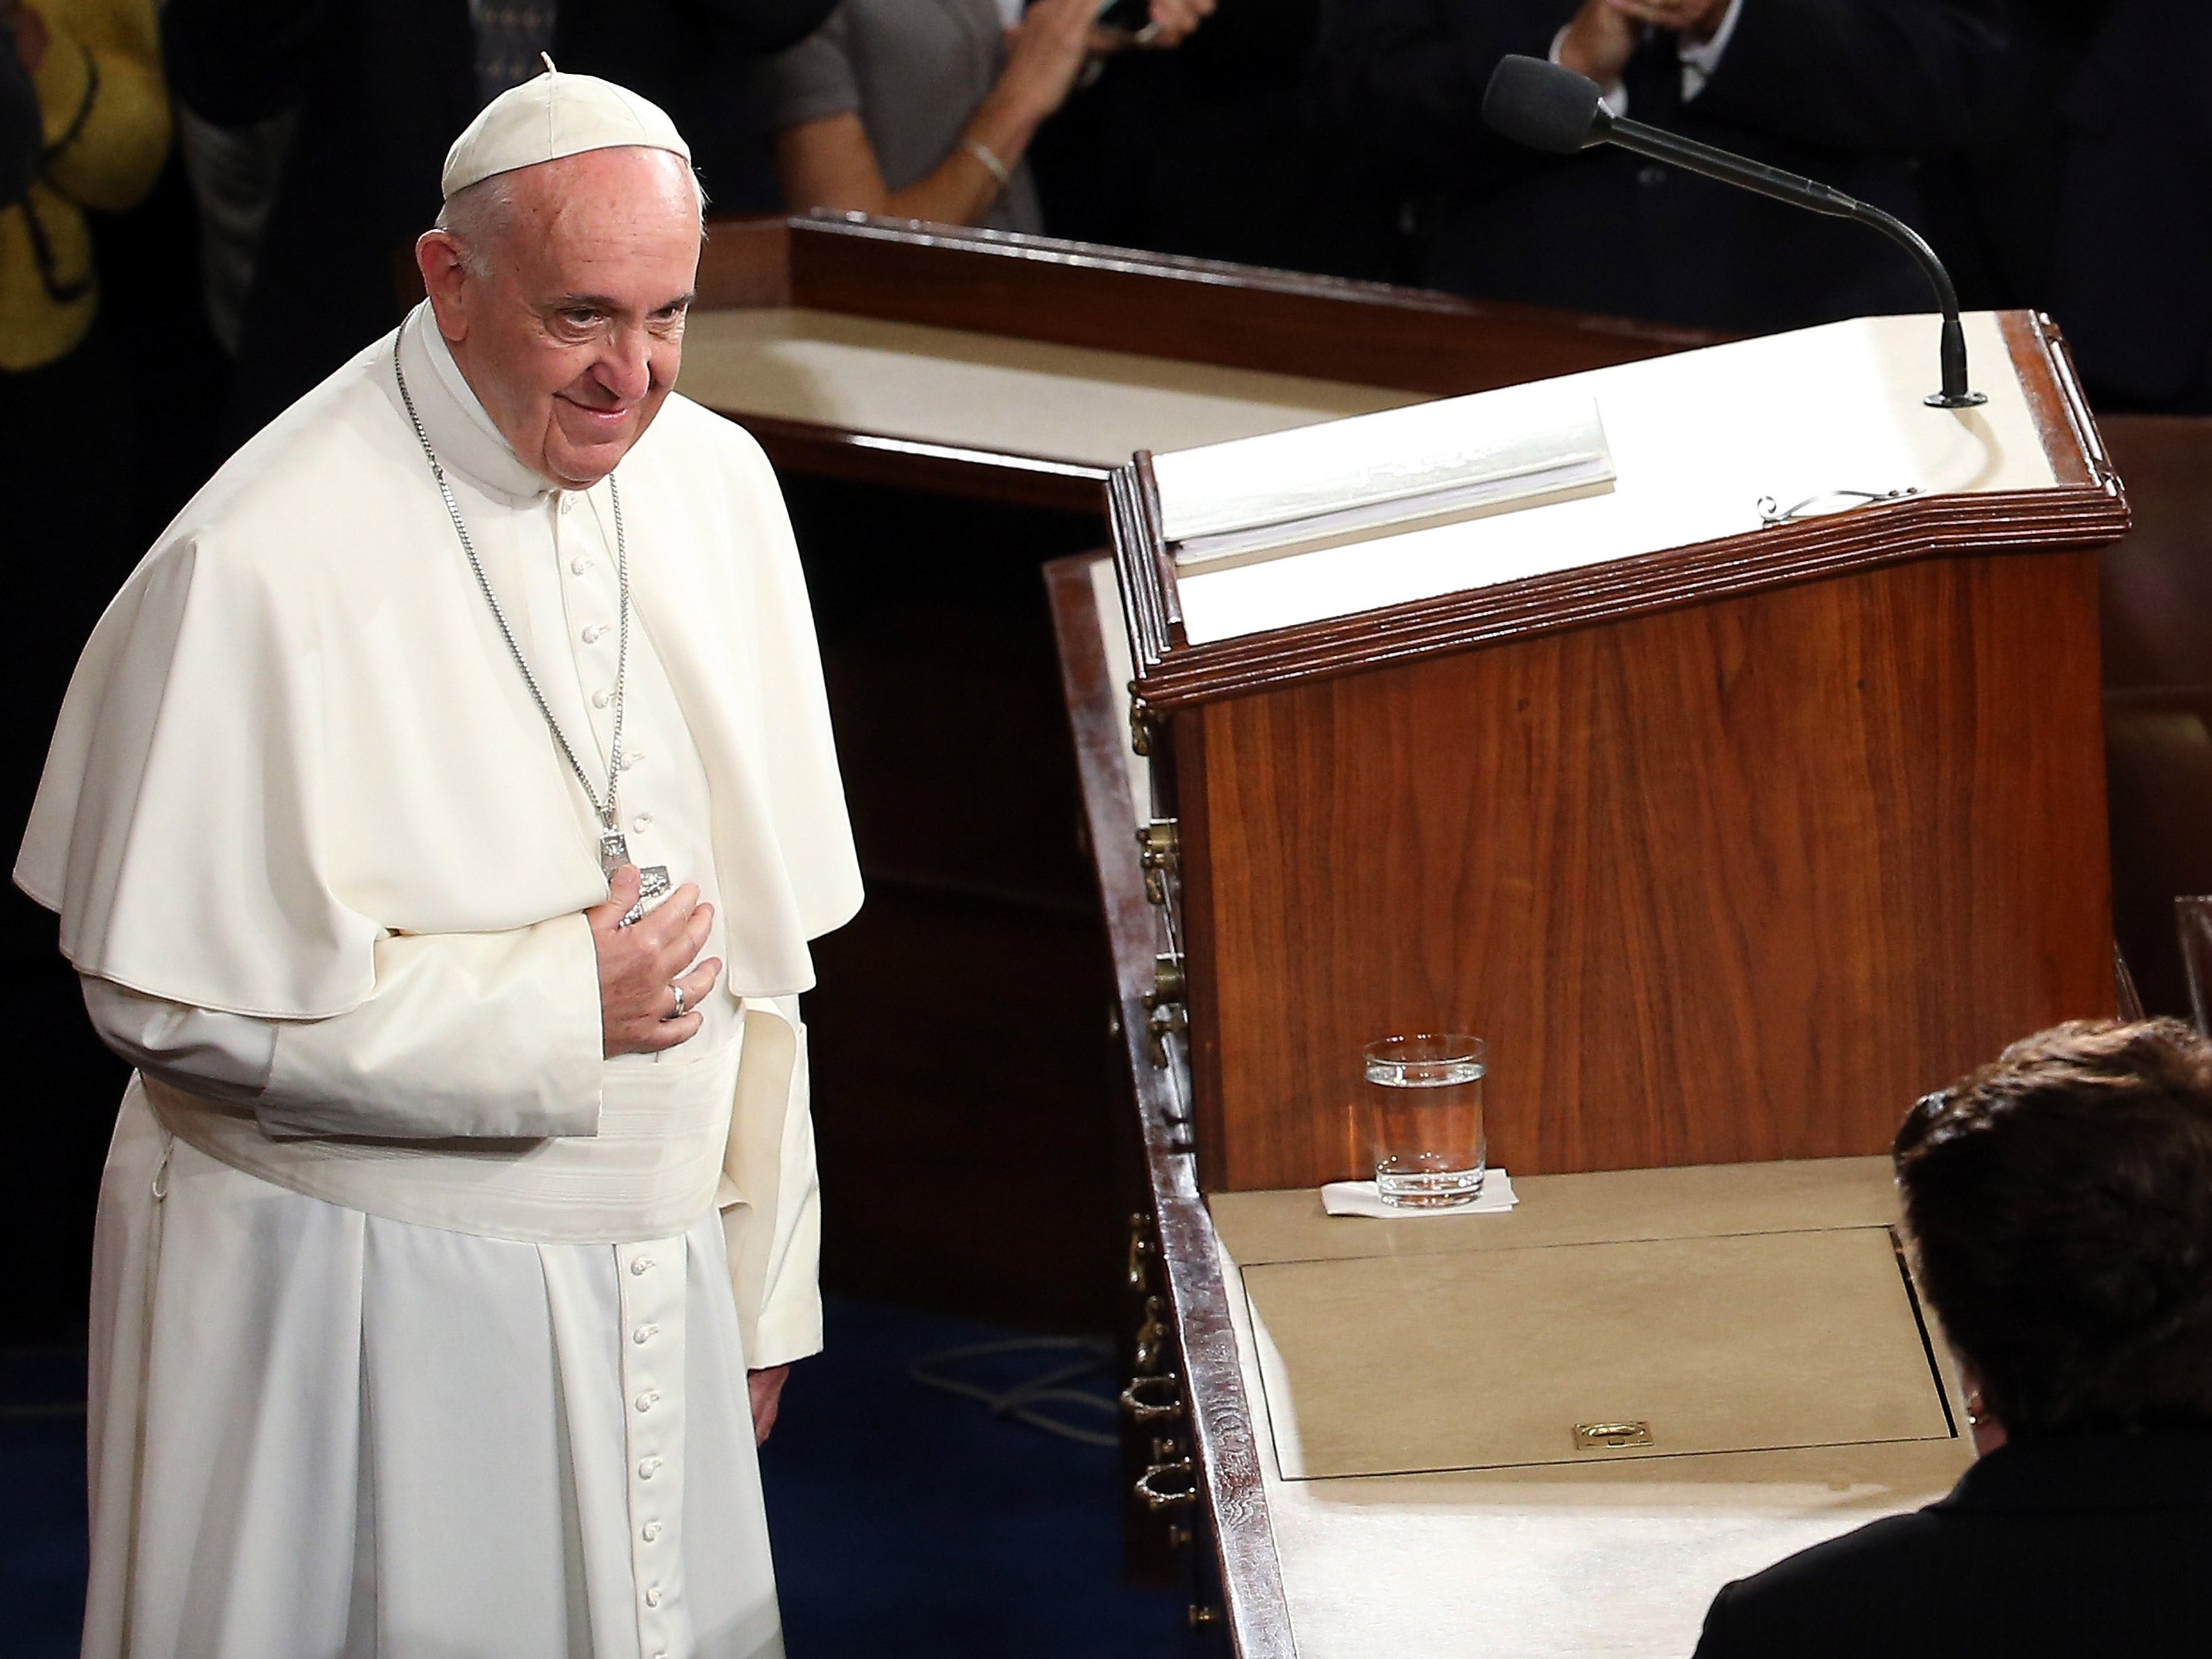 Soon after the Pope's address to Congress, Representative Robert Brady took the pontiff's water glass